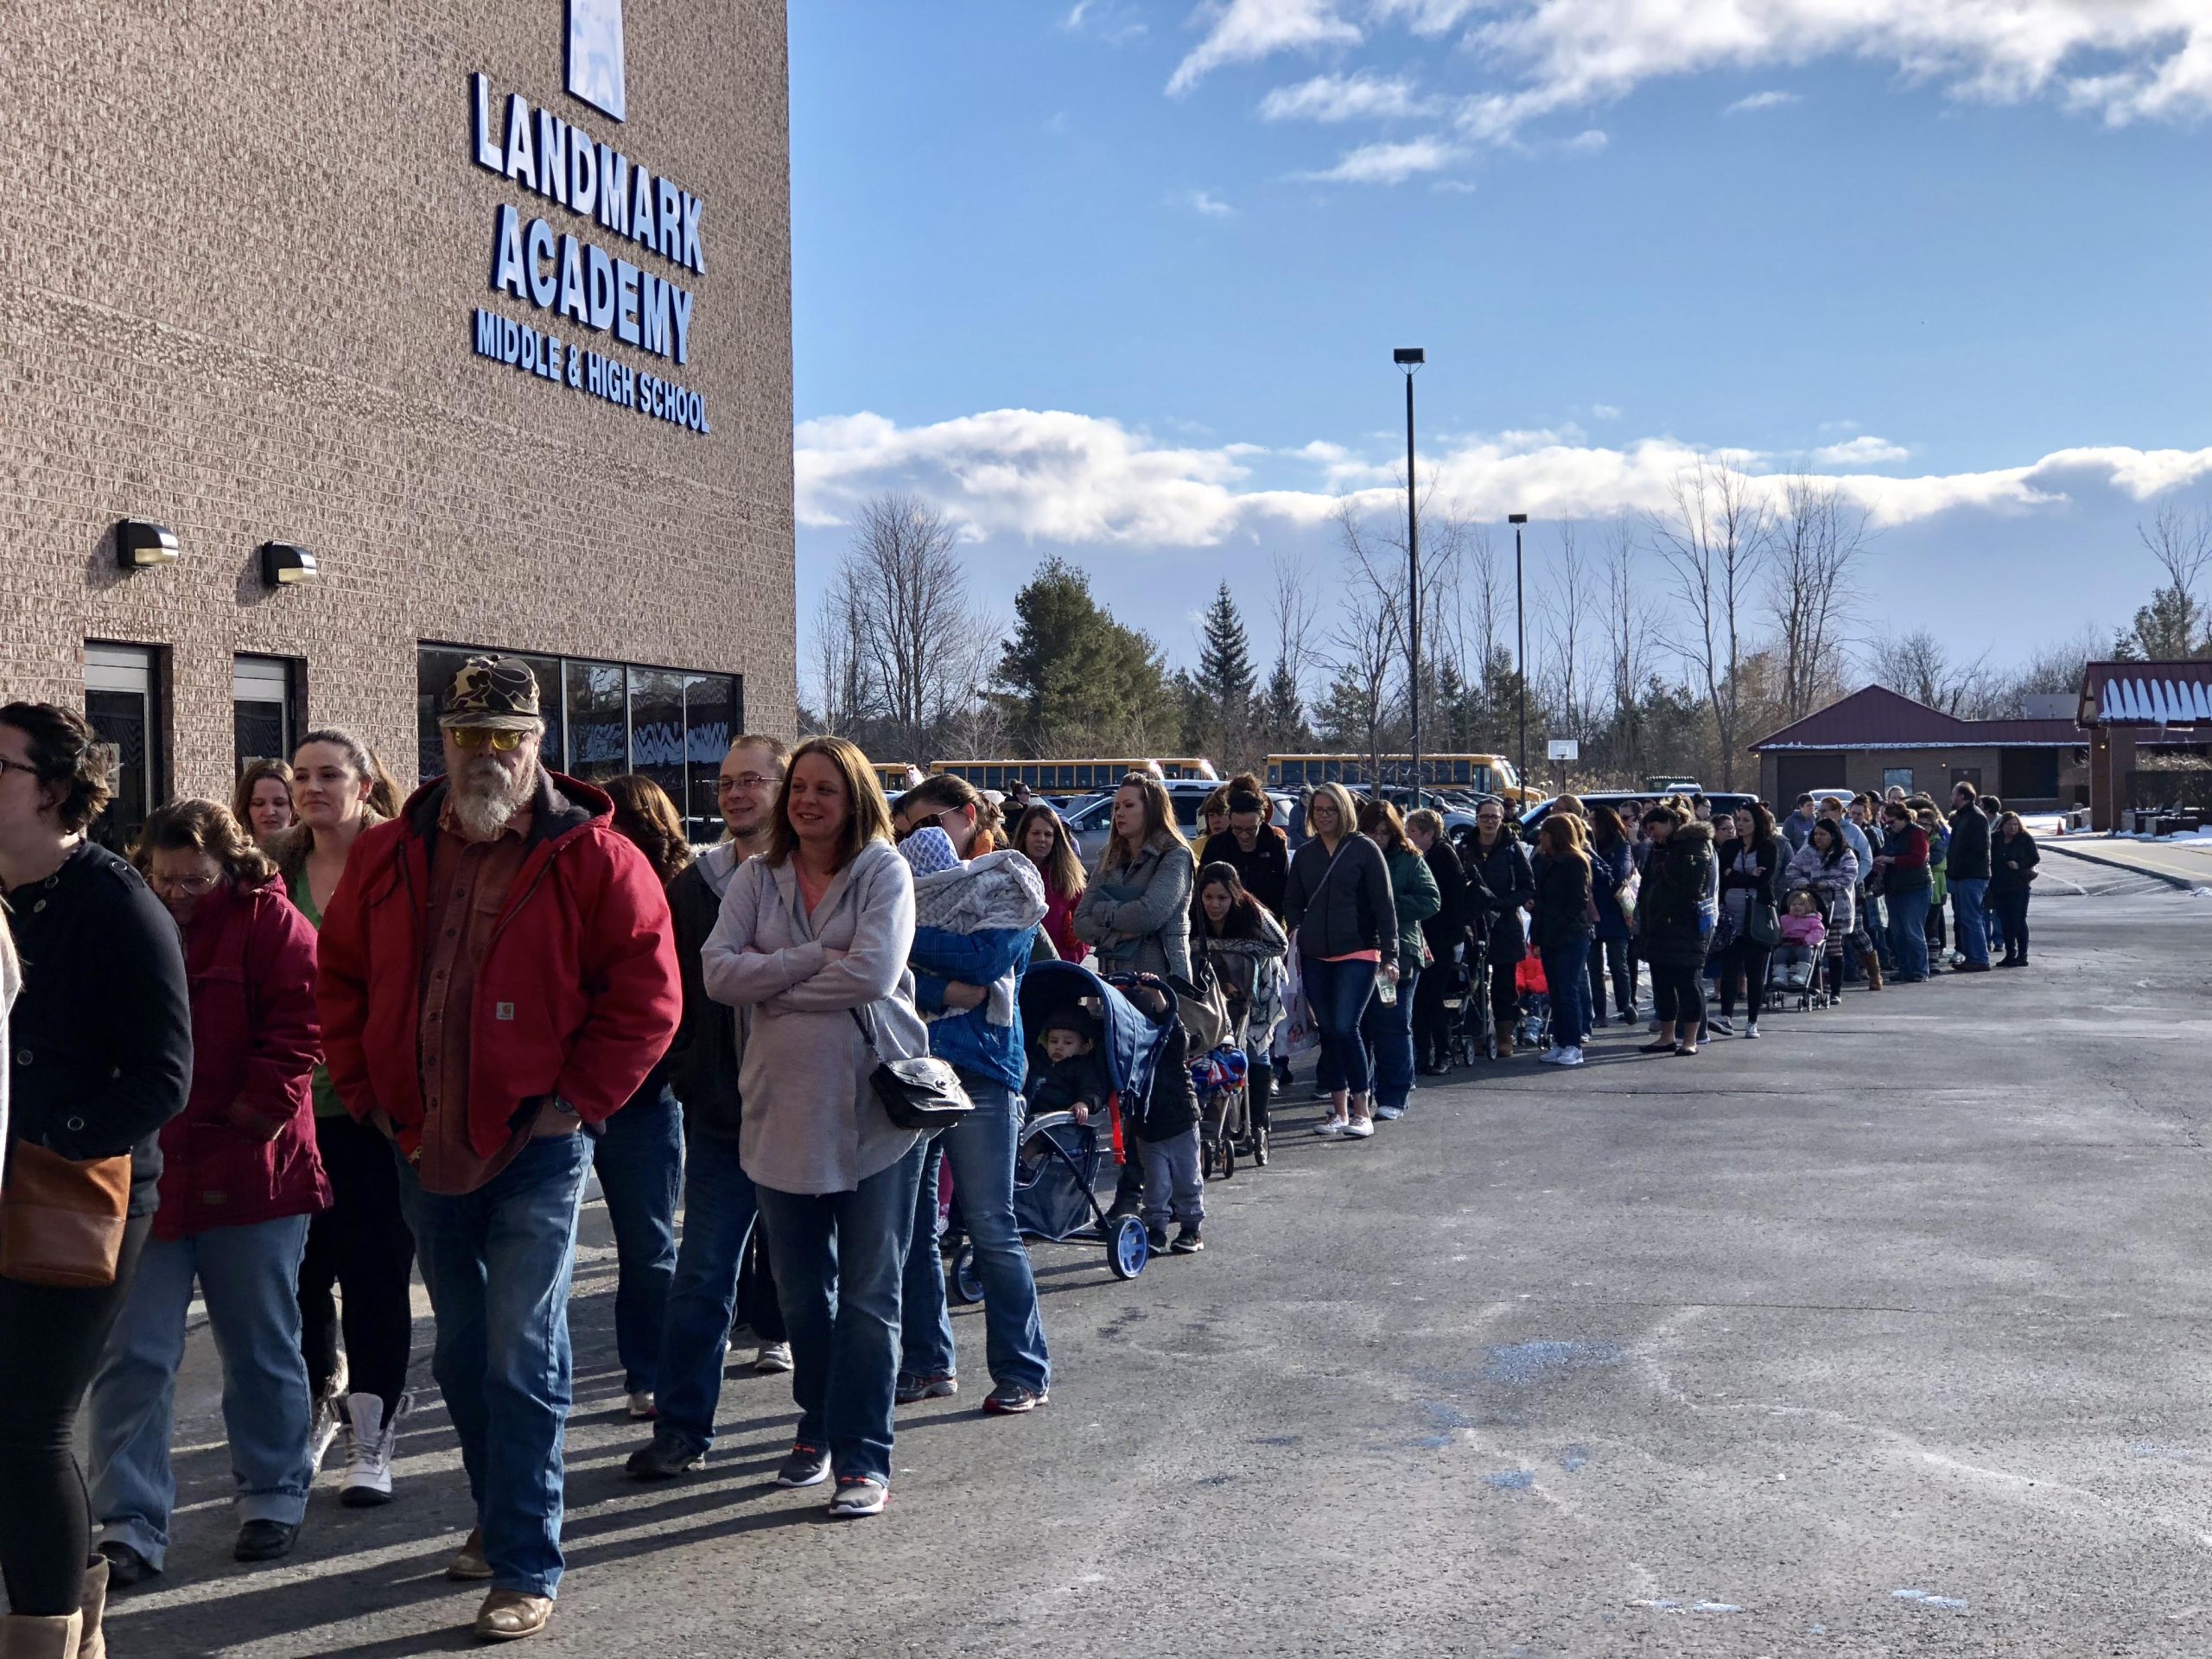 the line at the mom to mom sale gets long